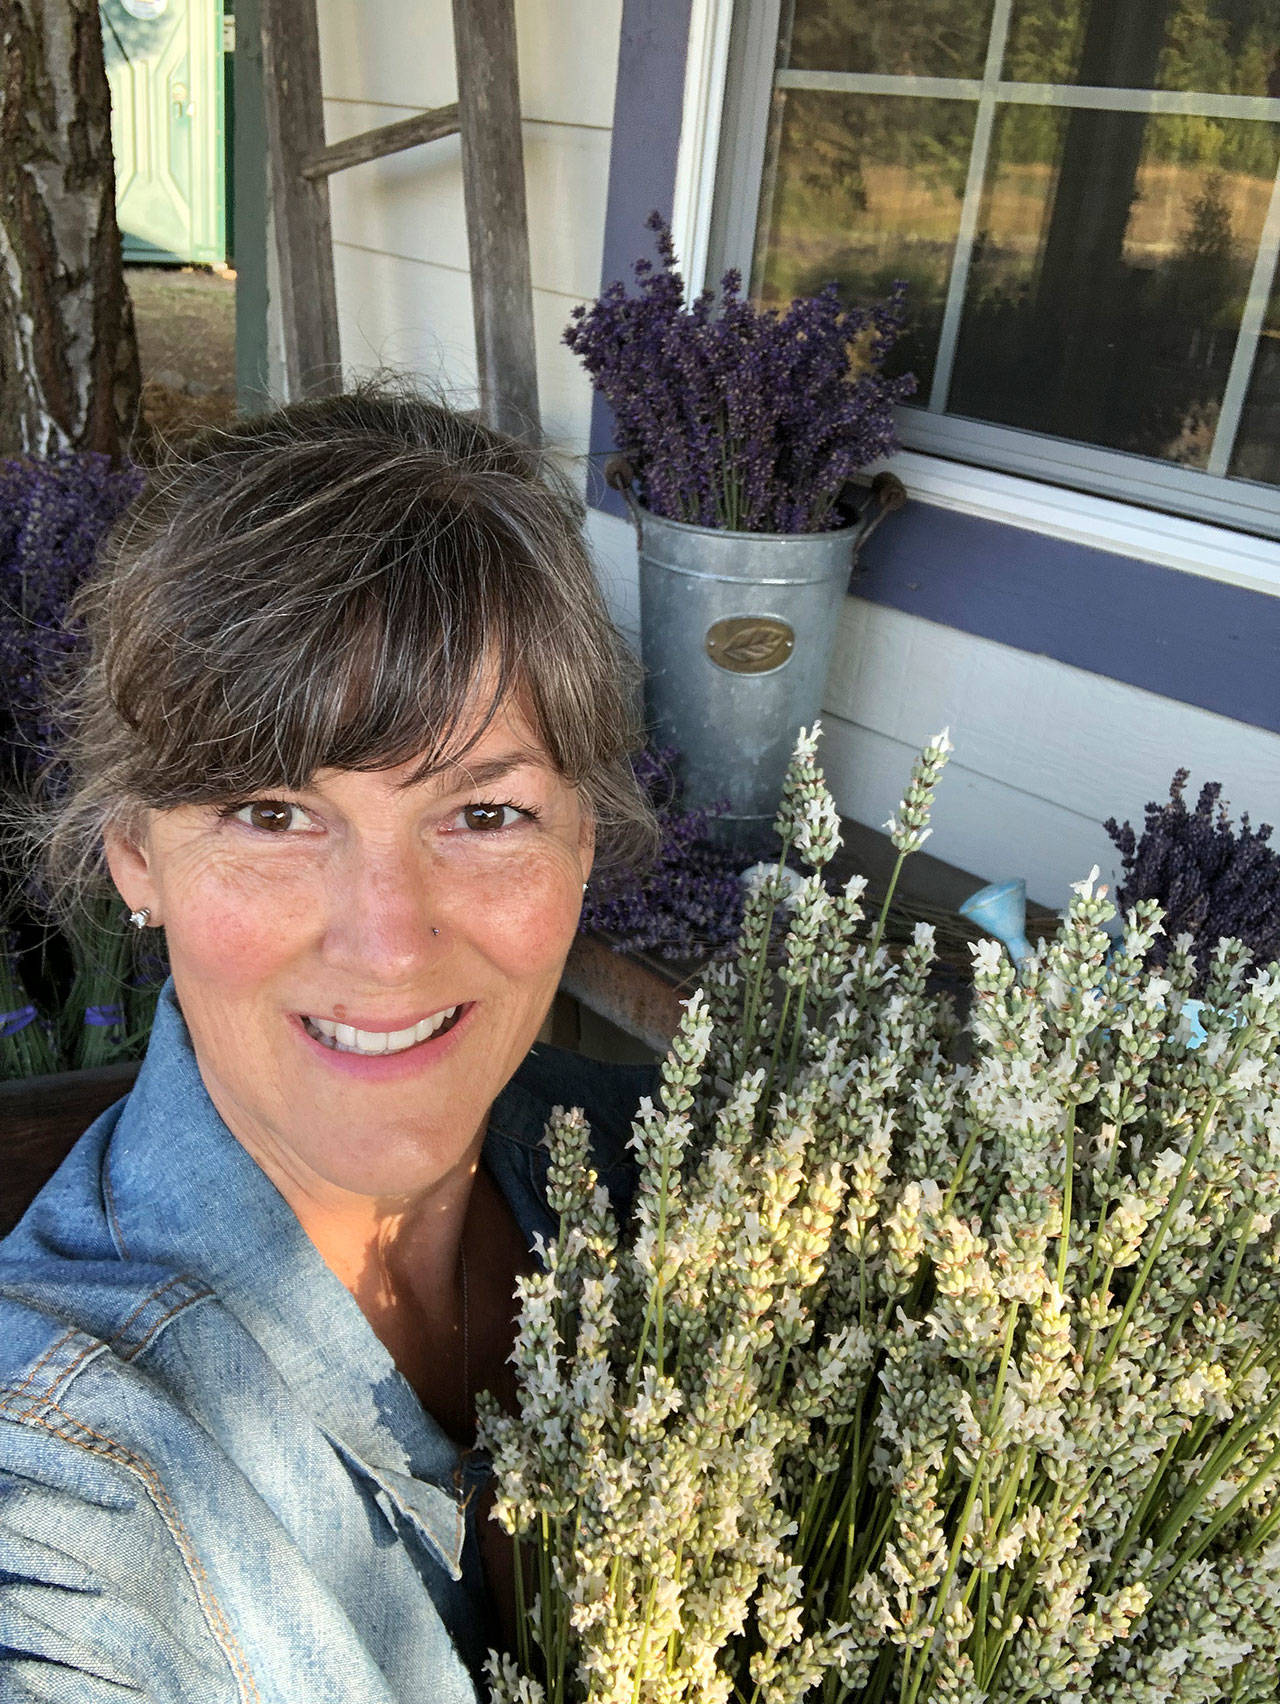 Susan Steffes of Fleurish Lavender of Lost Mountain received two awards at the International Lavender Essential Oil Judging of 2019 Oils. Submitted photo